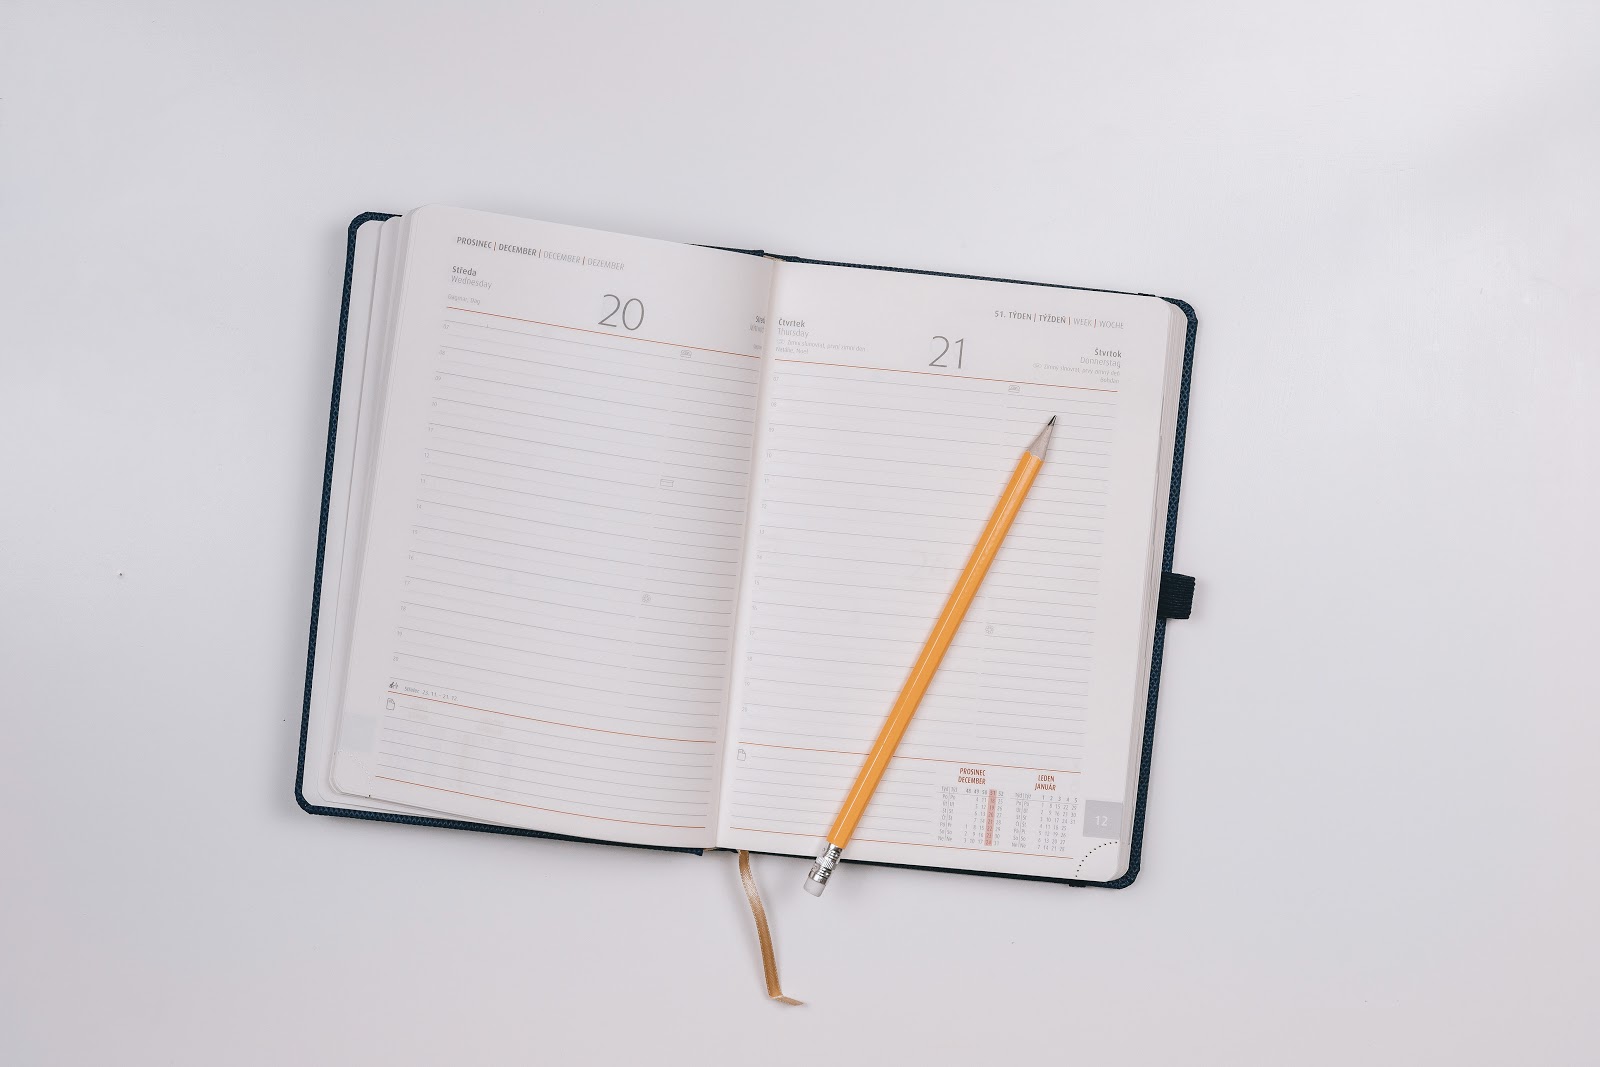 Diary management for dummies in December